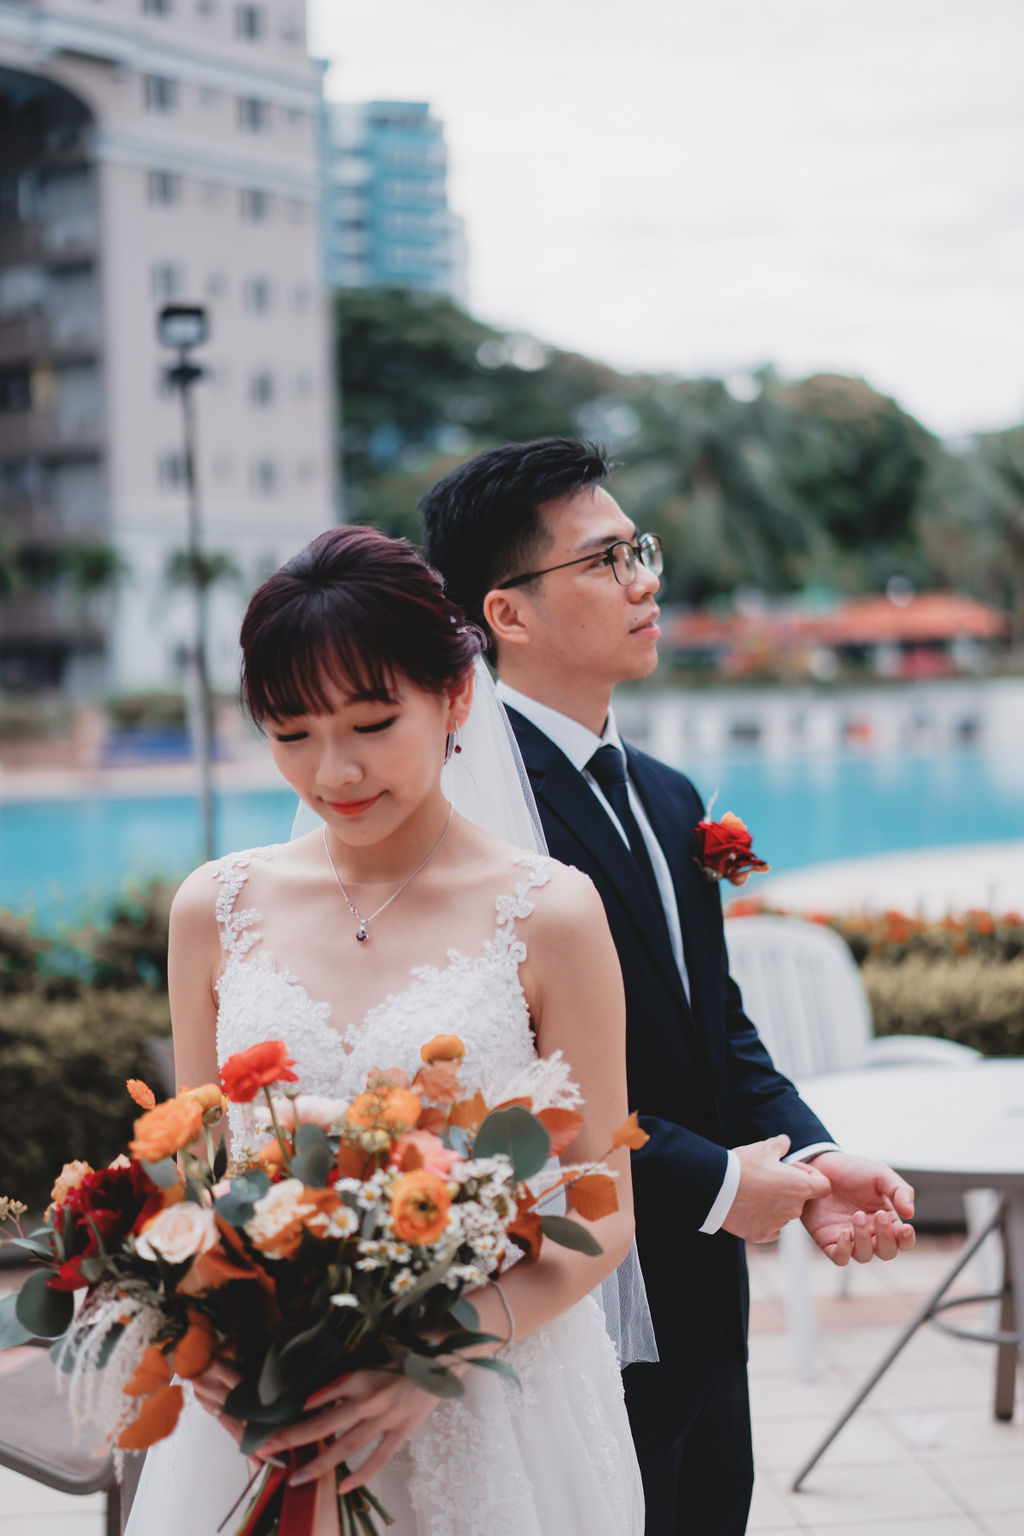 Wedding Day Photography at Hotel Fort Canning Garden Solemnisation by Michael on OneThreeOneFour 39